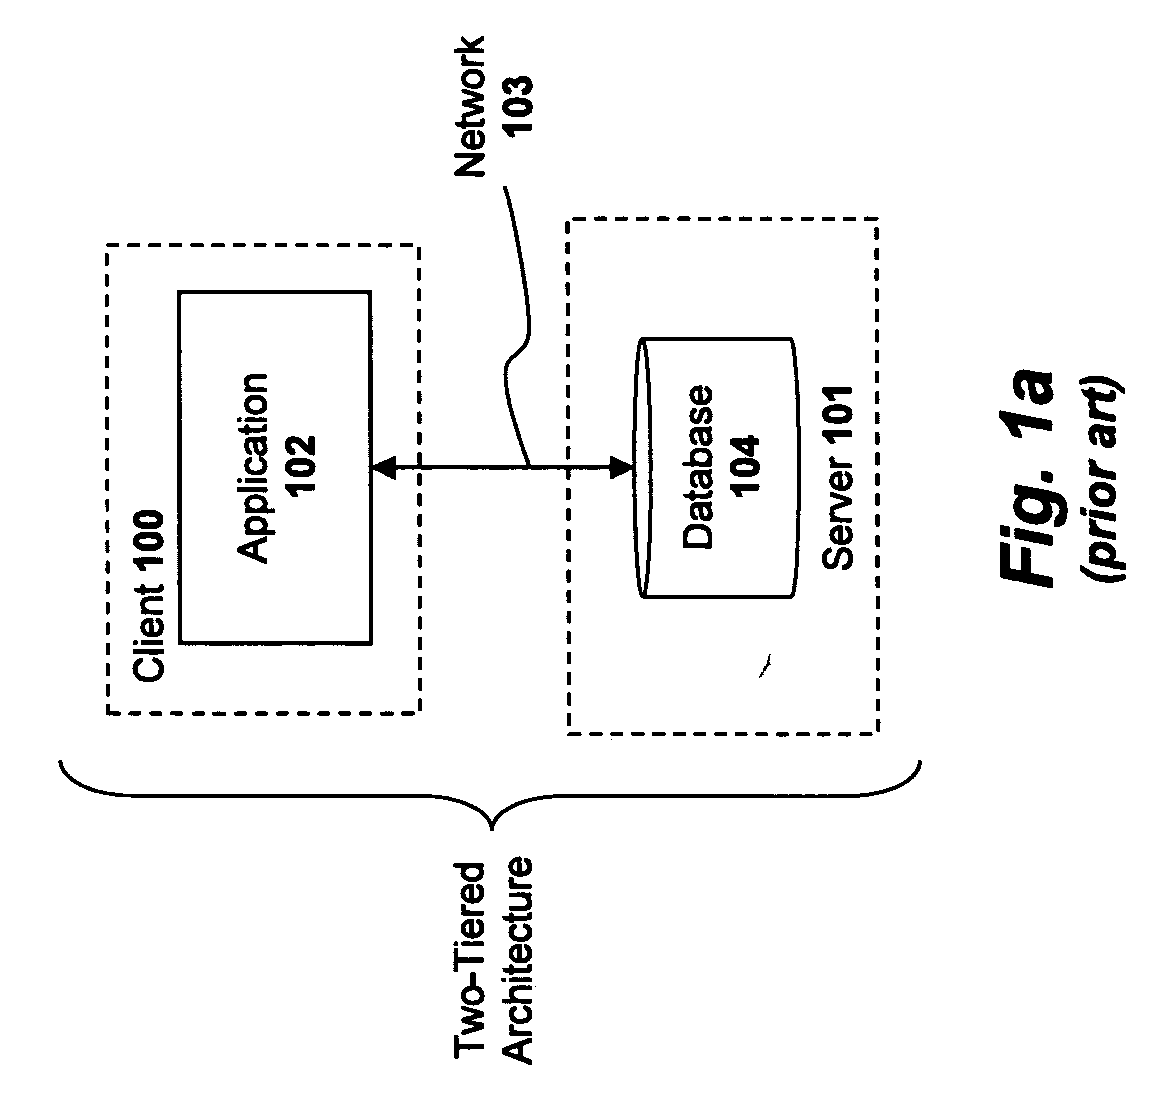 Graphical user interface system and method for presenting objects